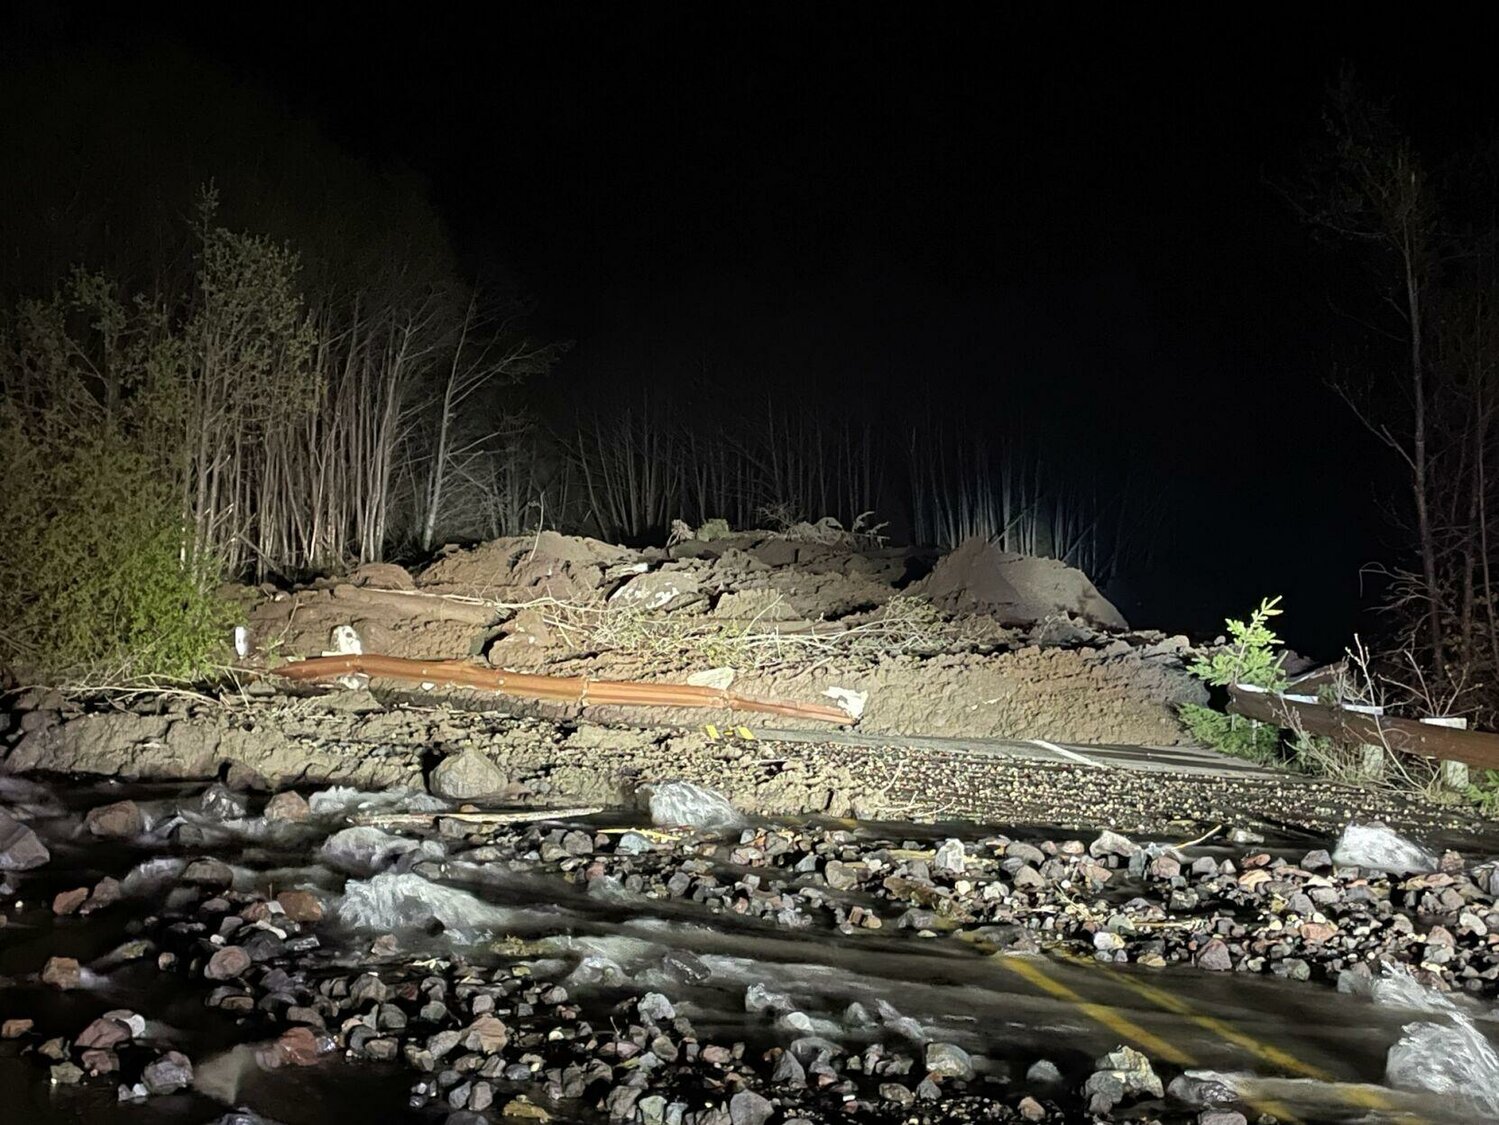 A debris slide blocked both directions of State Route 504/Spirit Lake Memorial Highway near Coldwater Lake on Sunday night.